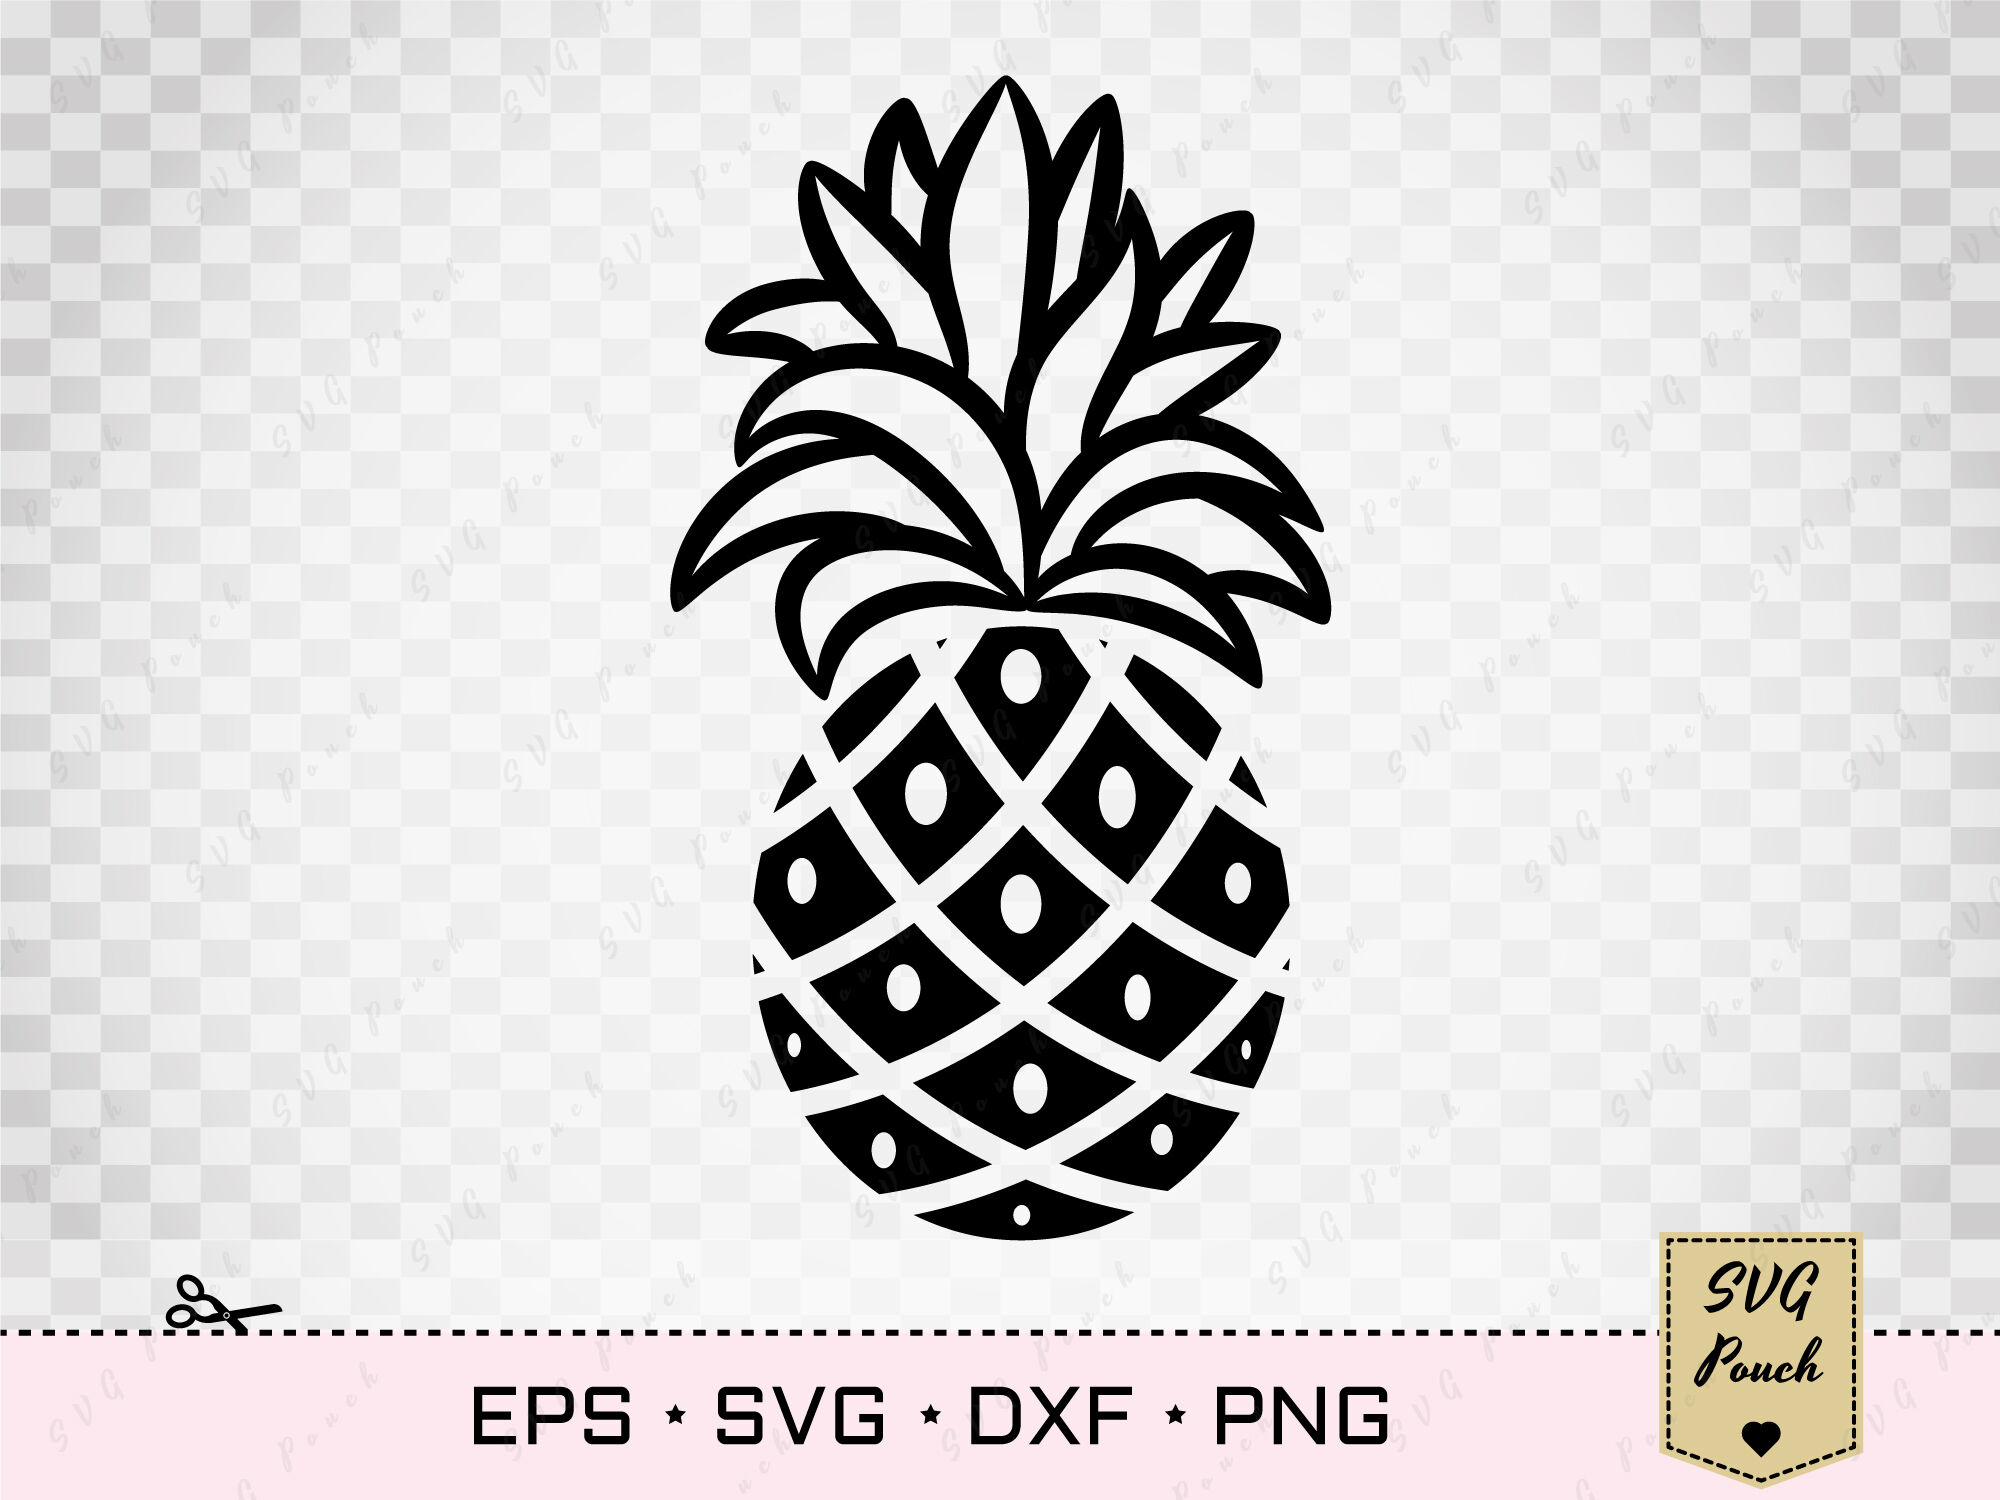 Pineapple Svg Silhouette By Svgpouch Thehungryjpeg Com